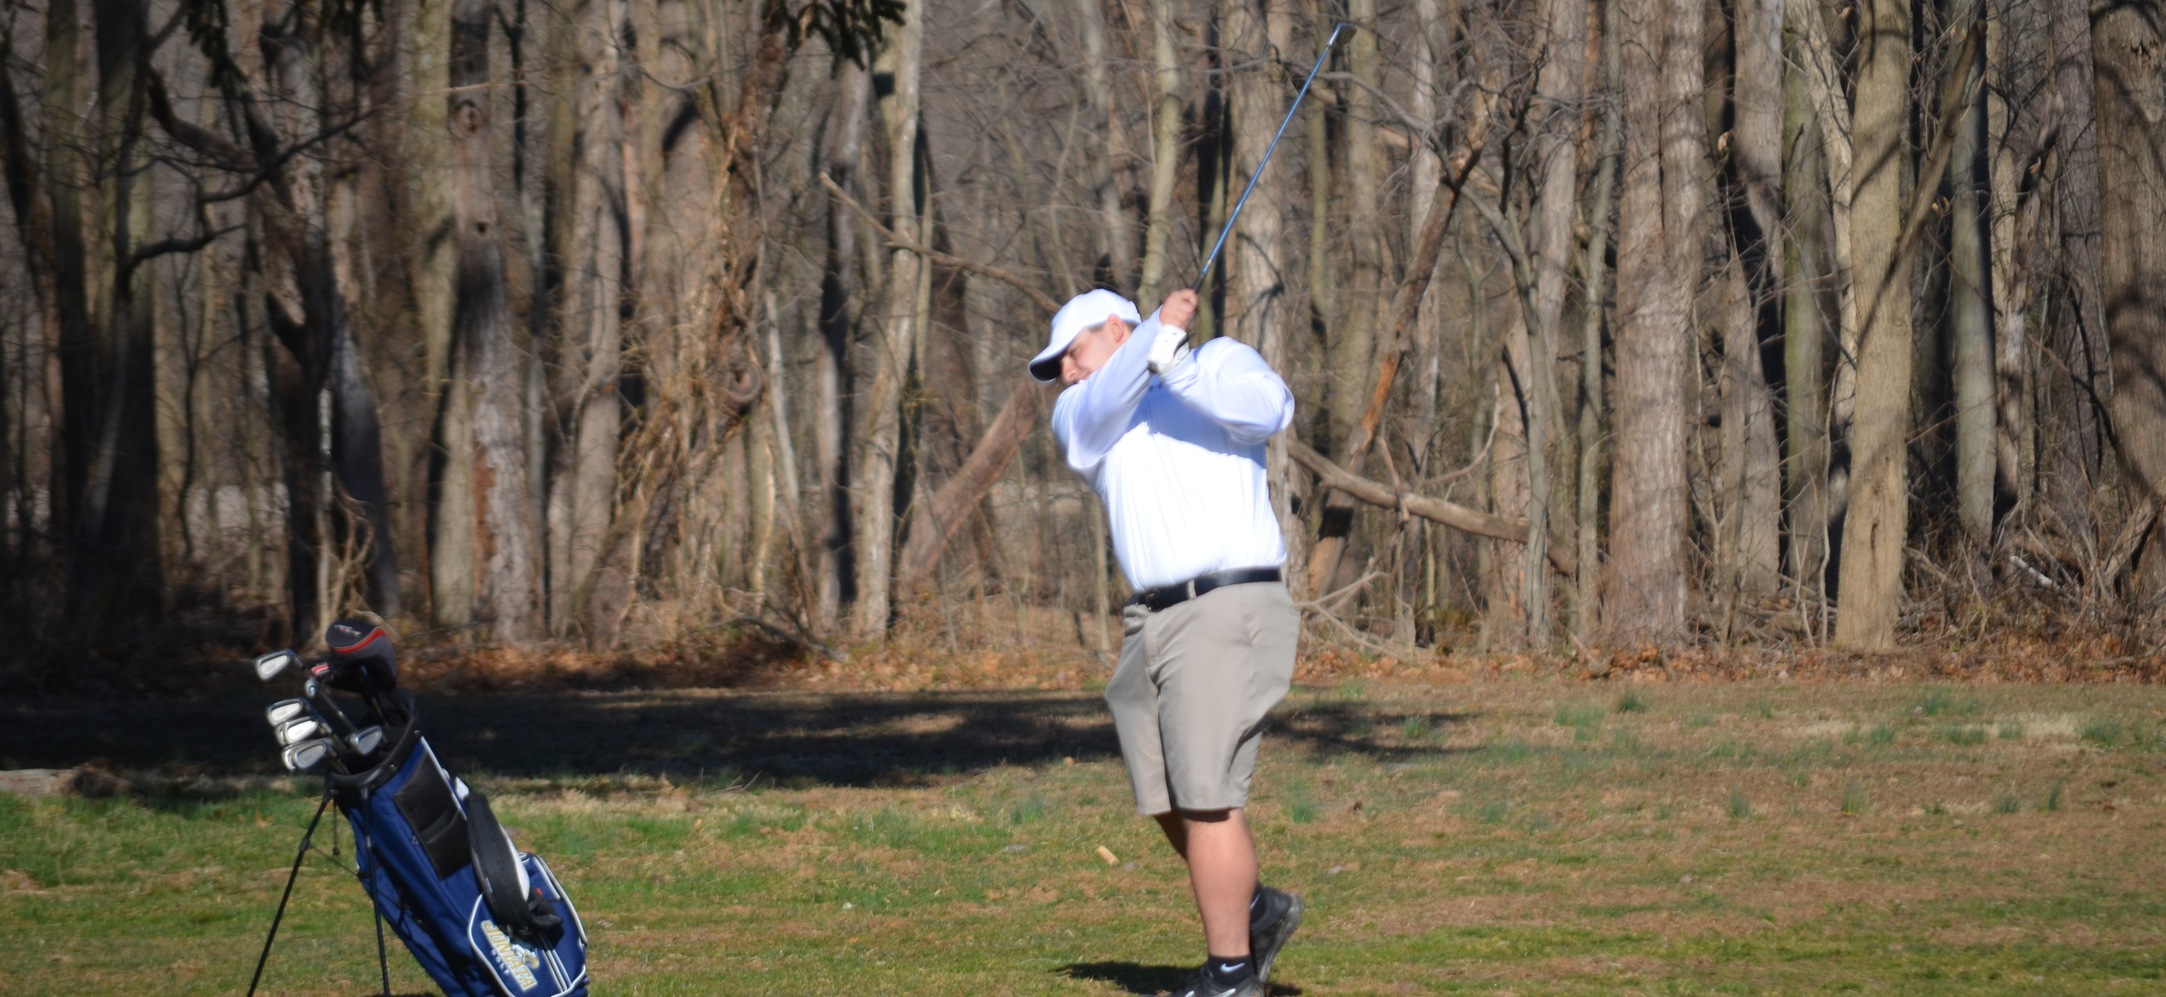 Men's Golf Places 10th at Gettysburg Spring Invitational